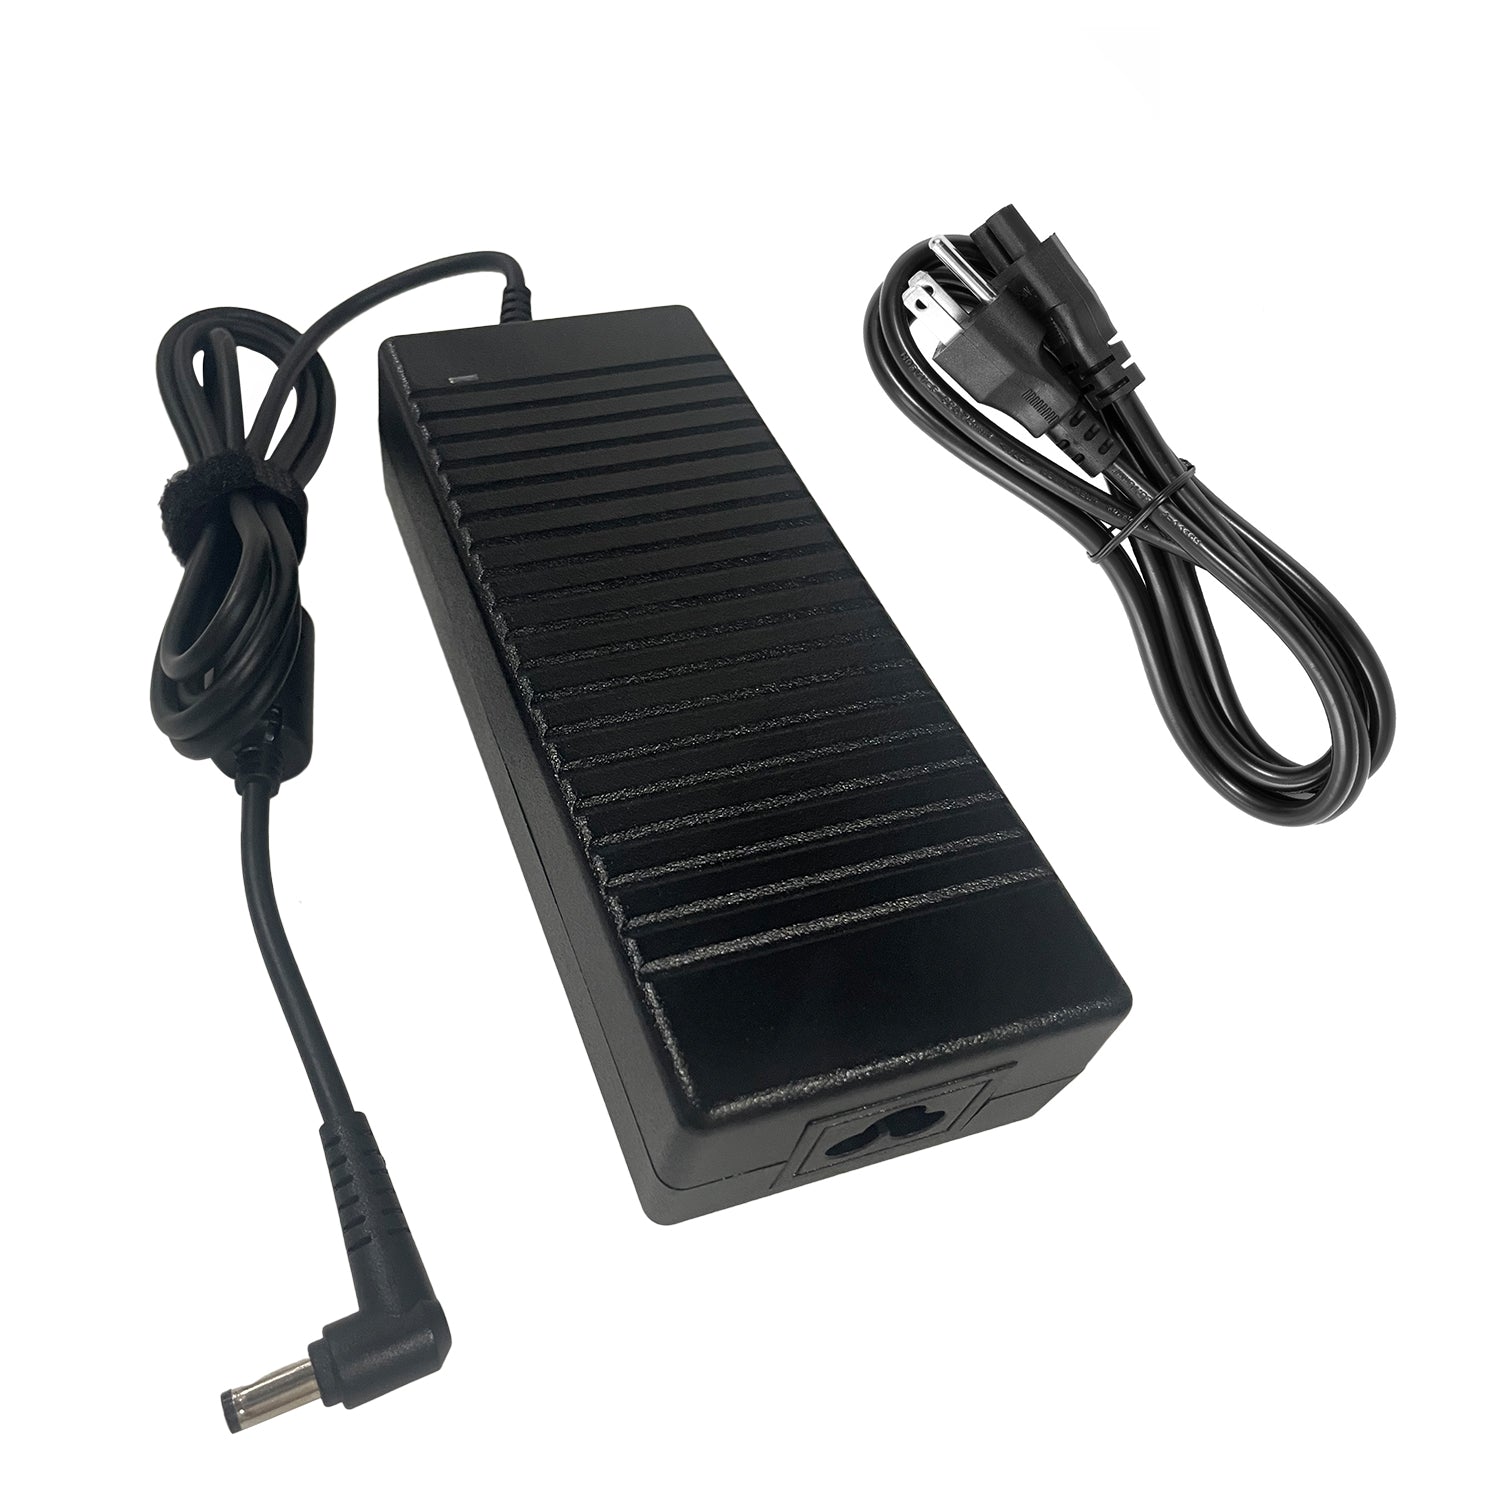 Charger for Panasonic Toughbook CF-31 Laptop